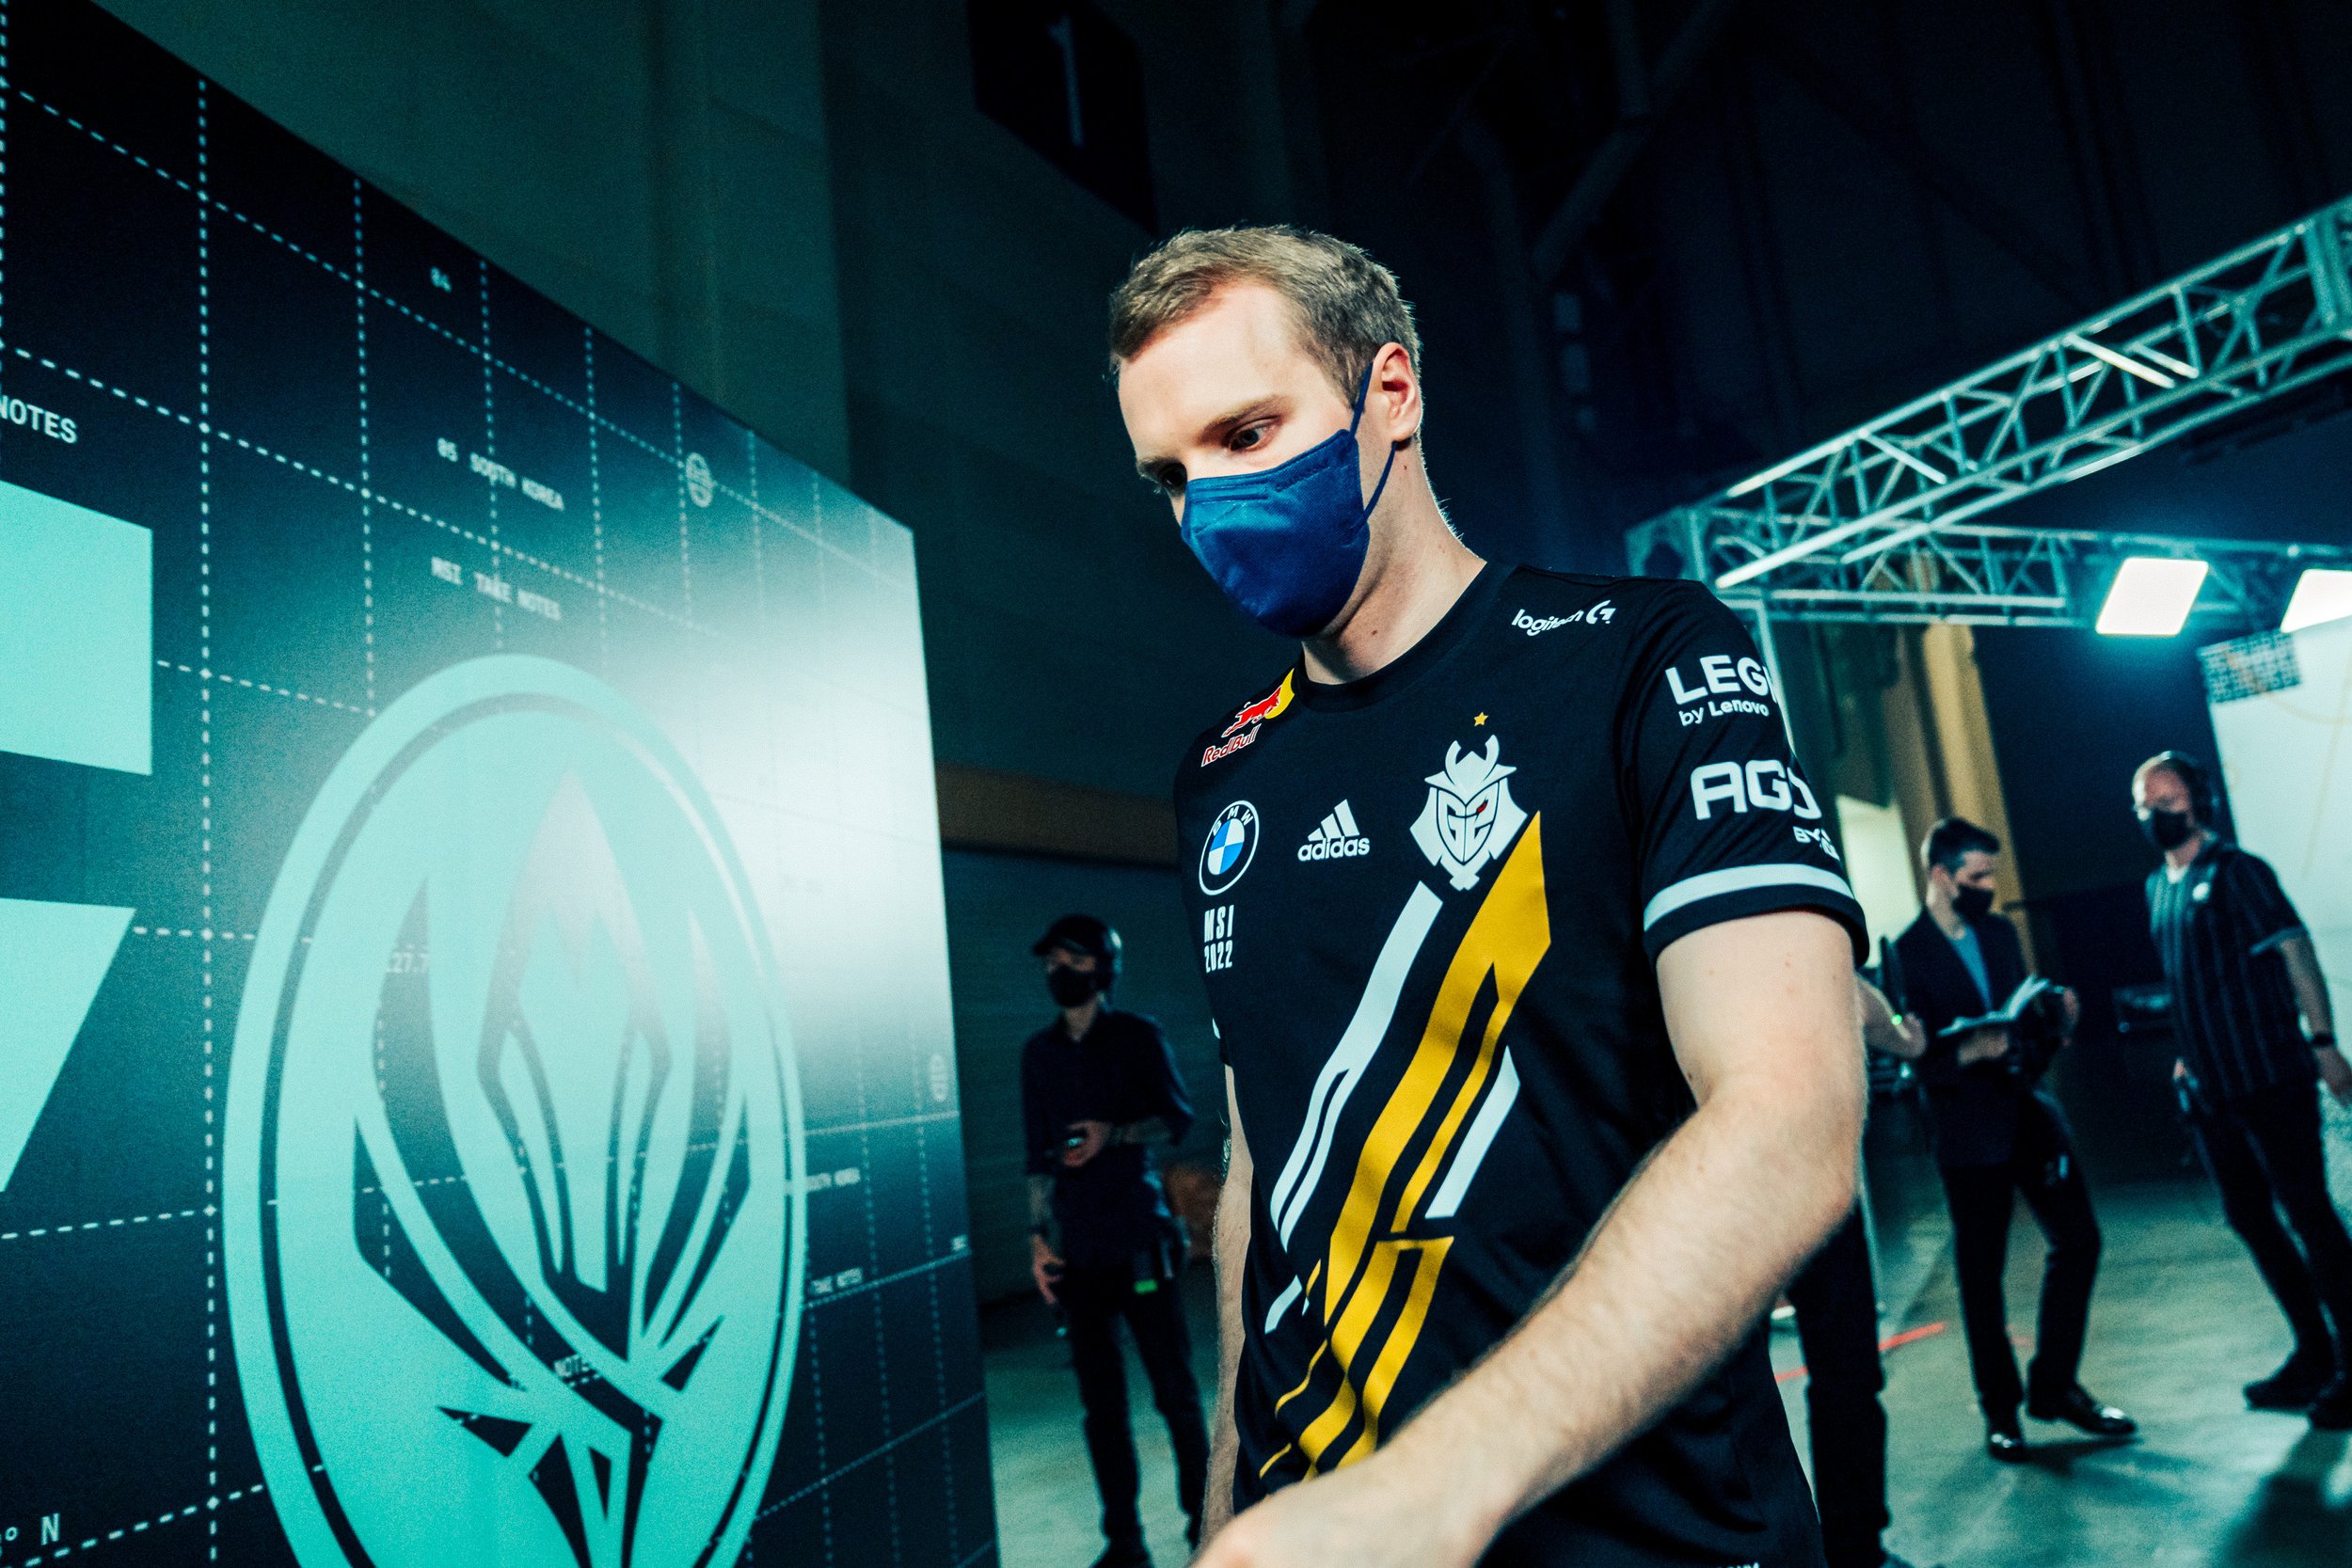 G2 Jankos entering the stage